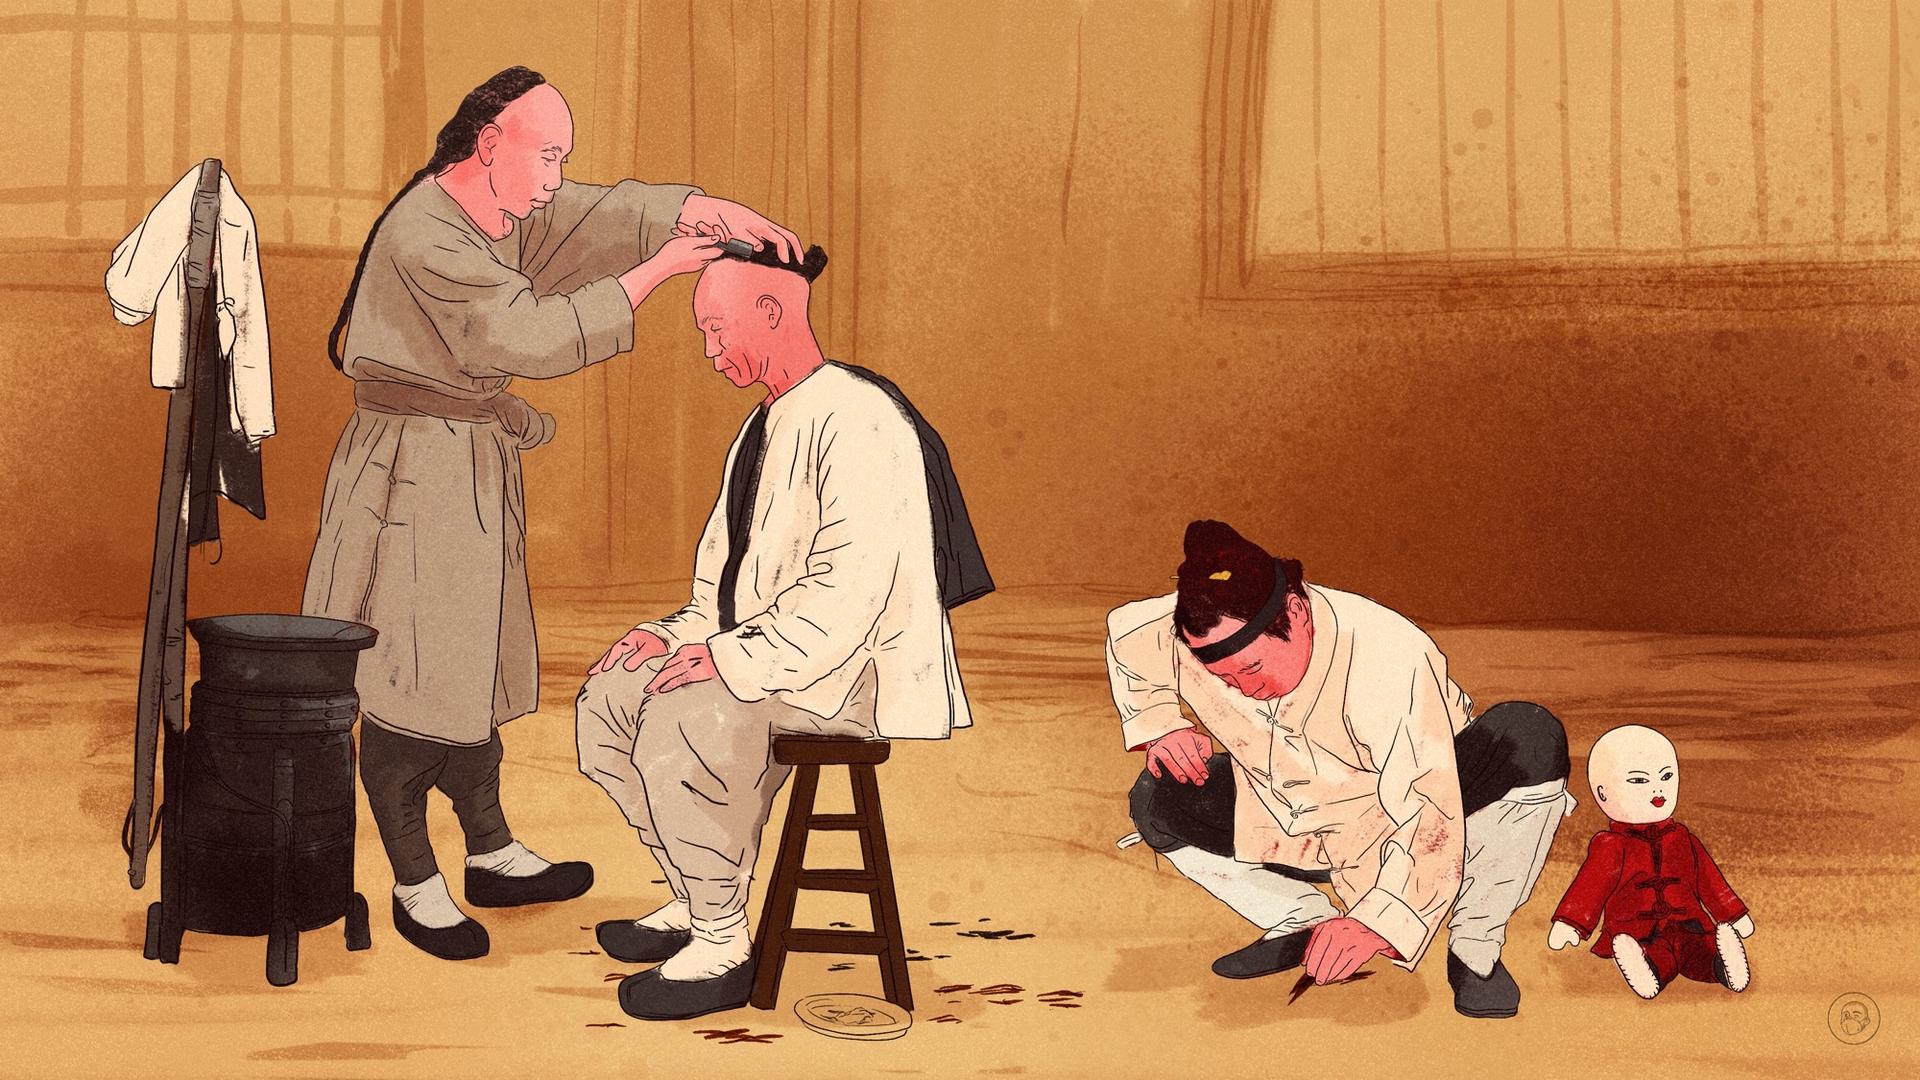 An illustration by Alex Santafe depicting a man cutting another man's hair, while a third man is picking up some hair to create a puppet and still the hair's owner soul.